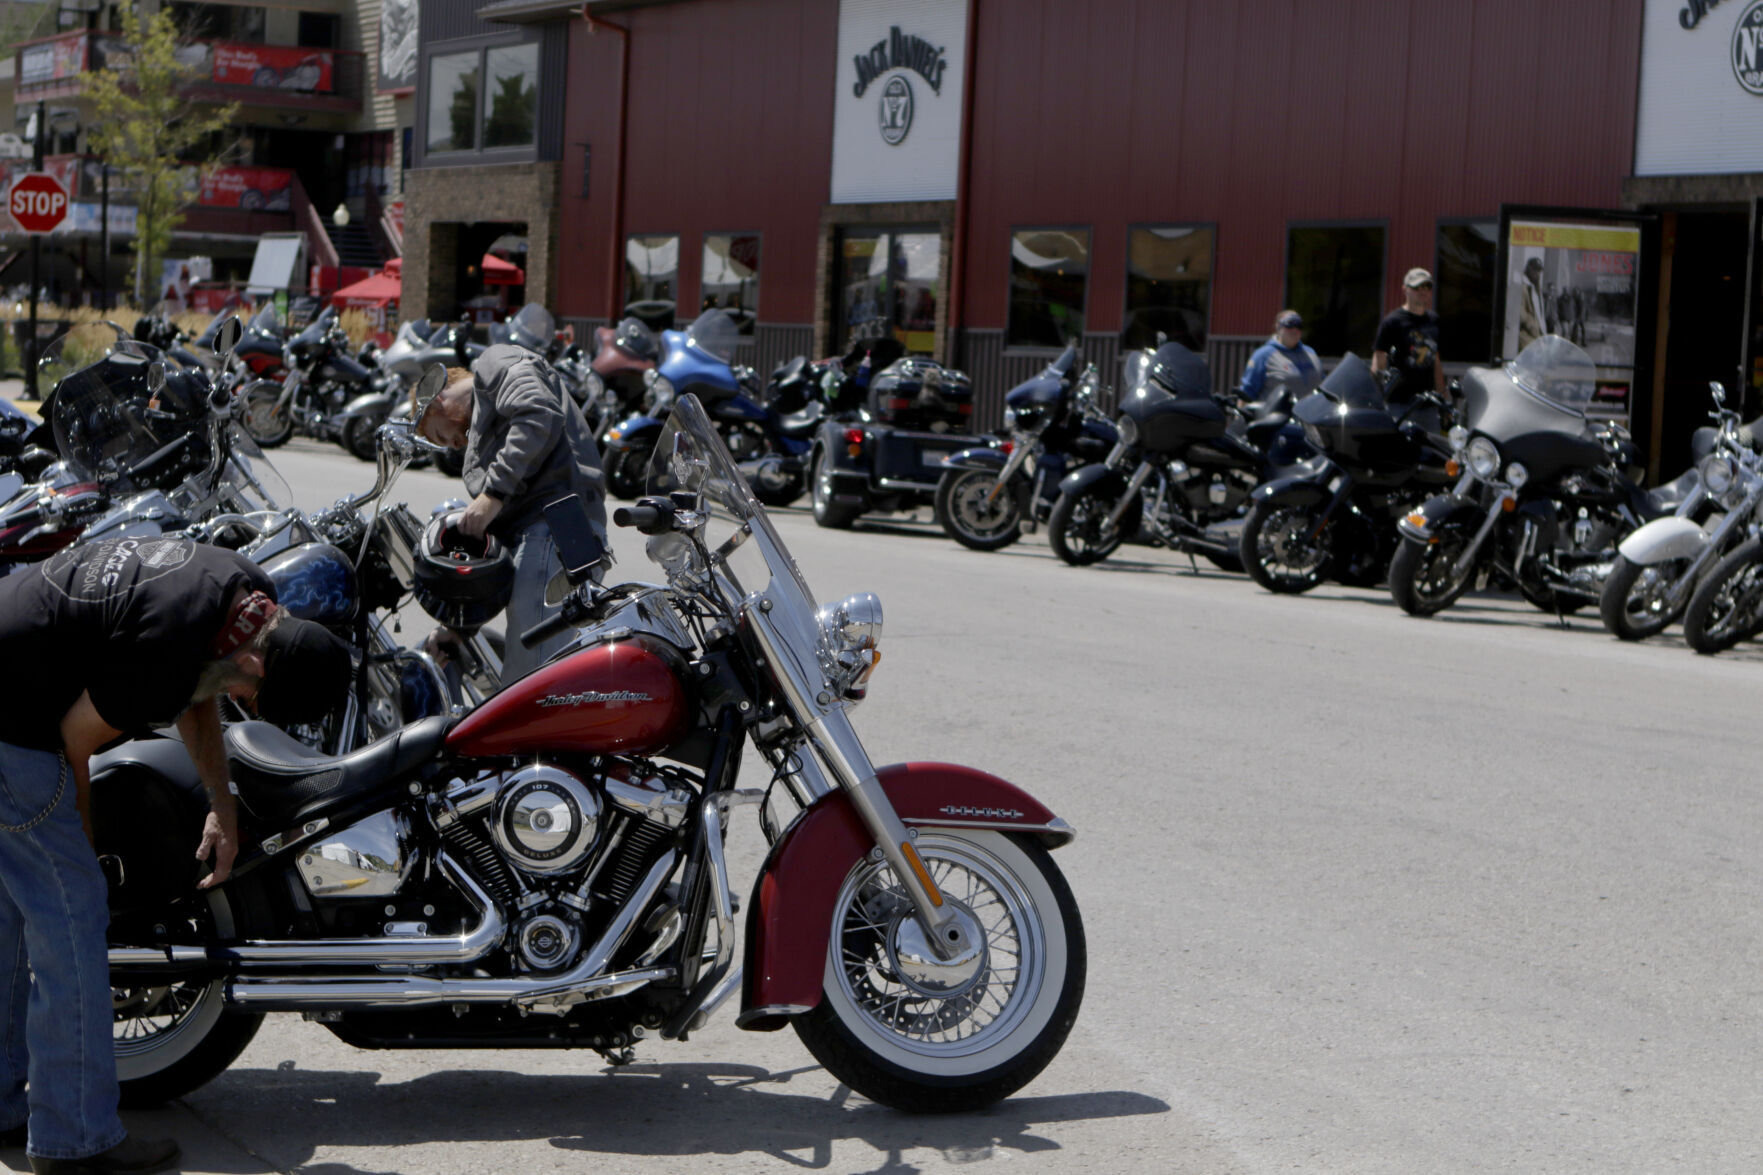 WEB CAMS Live views of the 82nd Annual Sturgis Motorcycle Rally picture